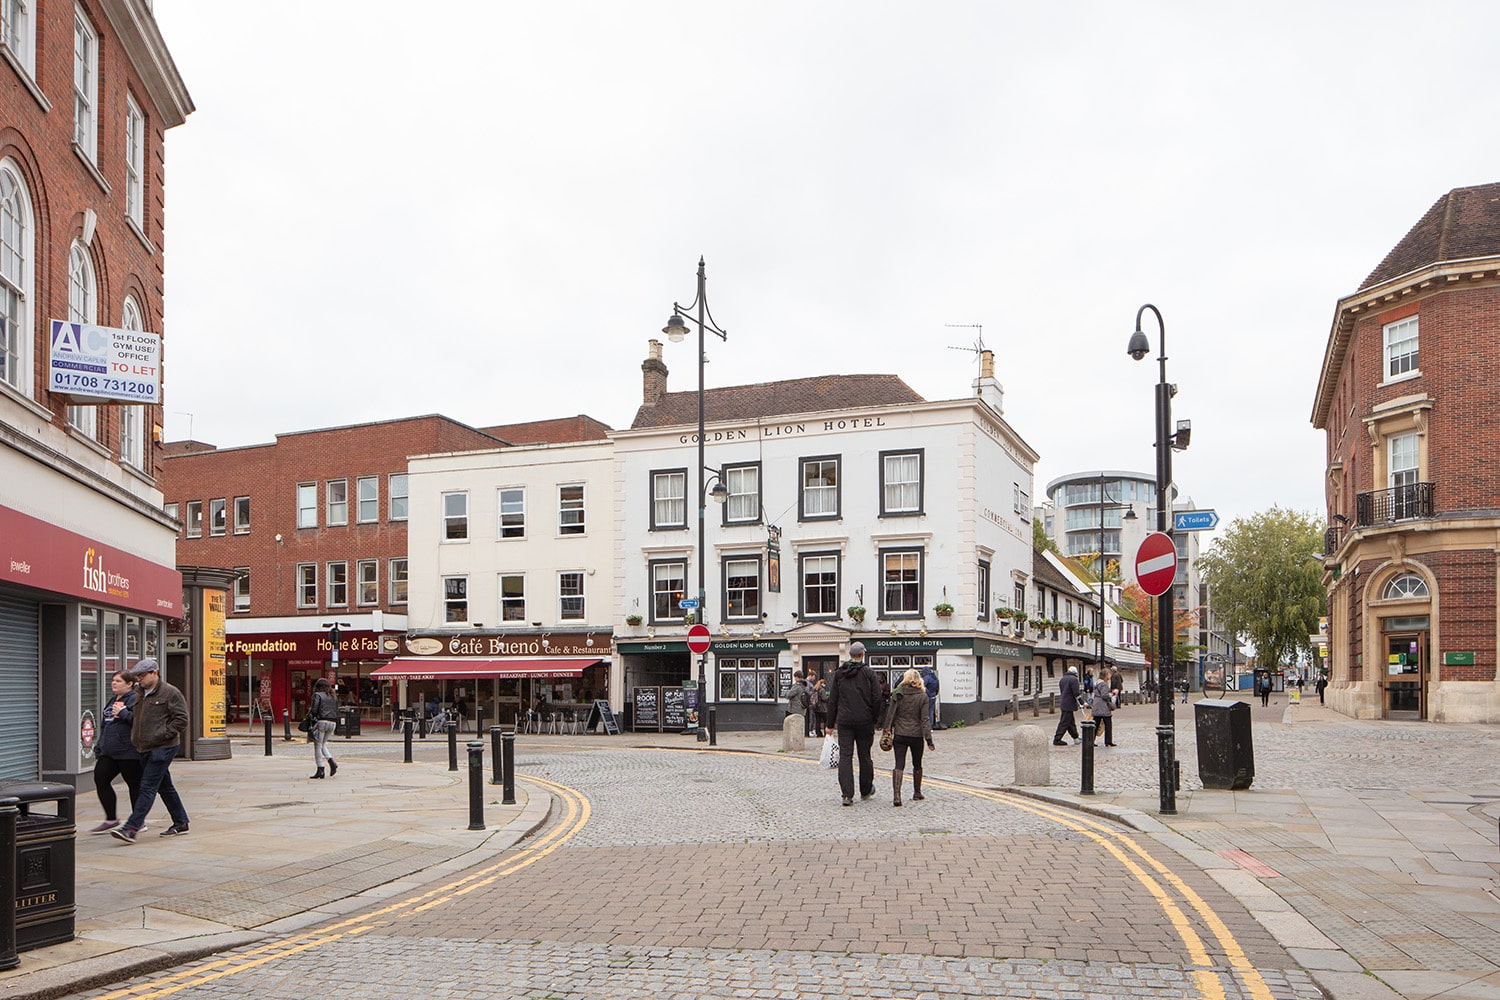 Support for Town Centres and High Streets